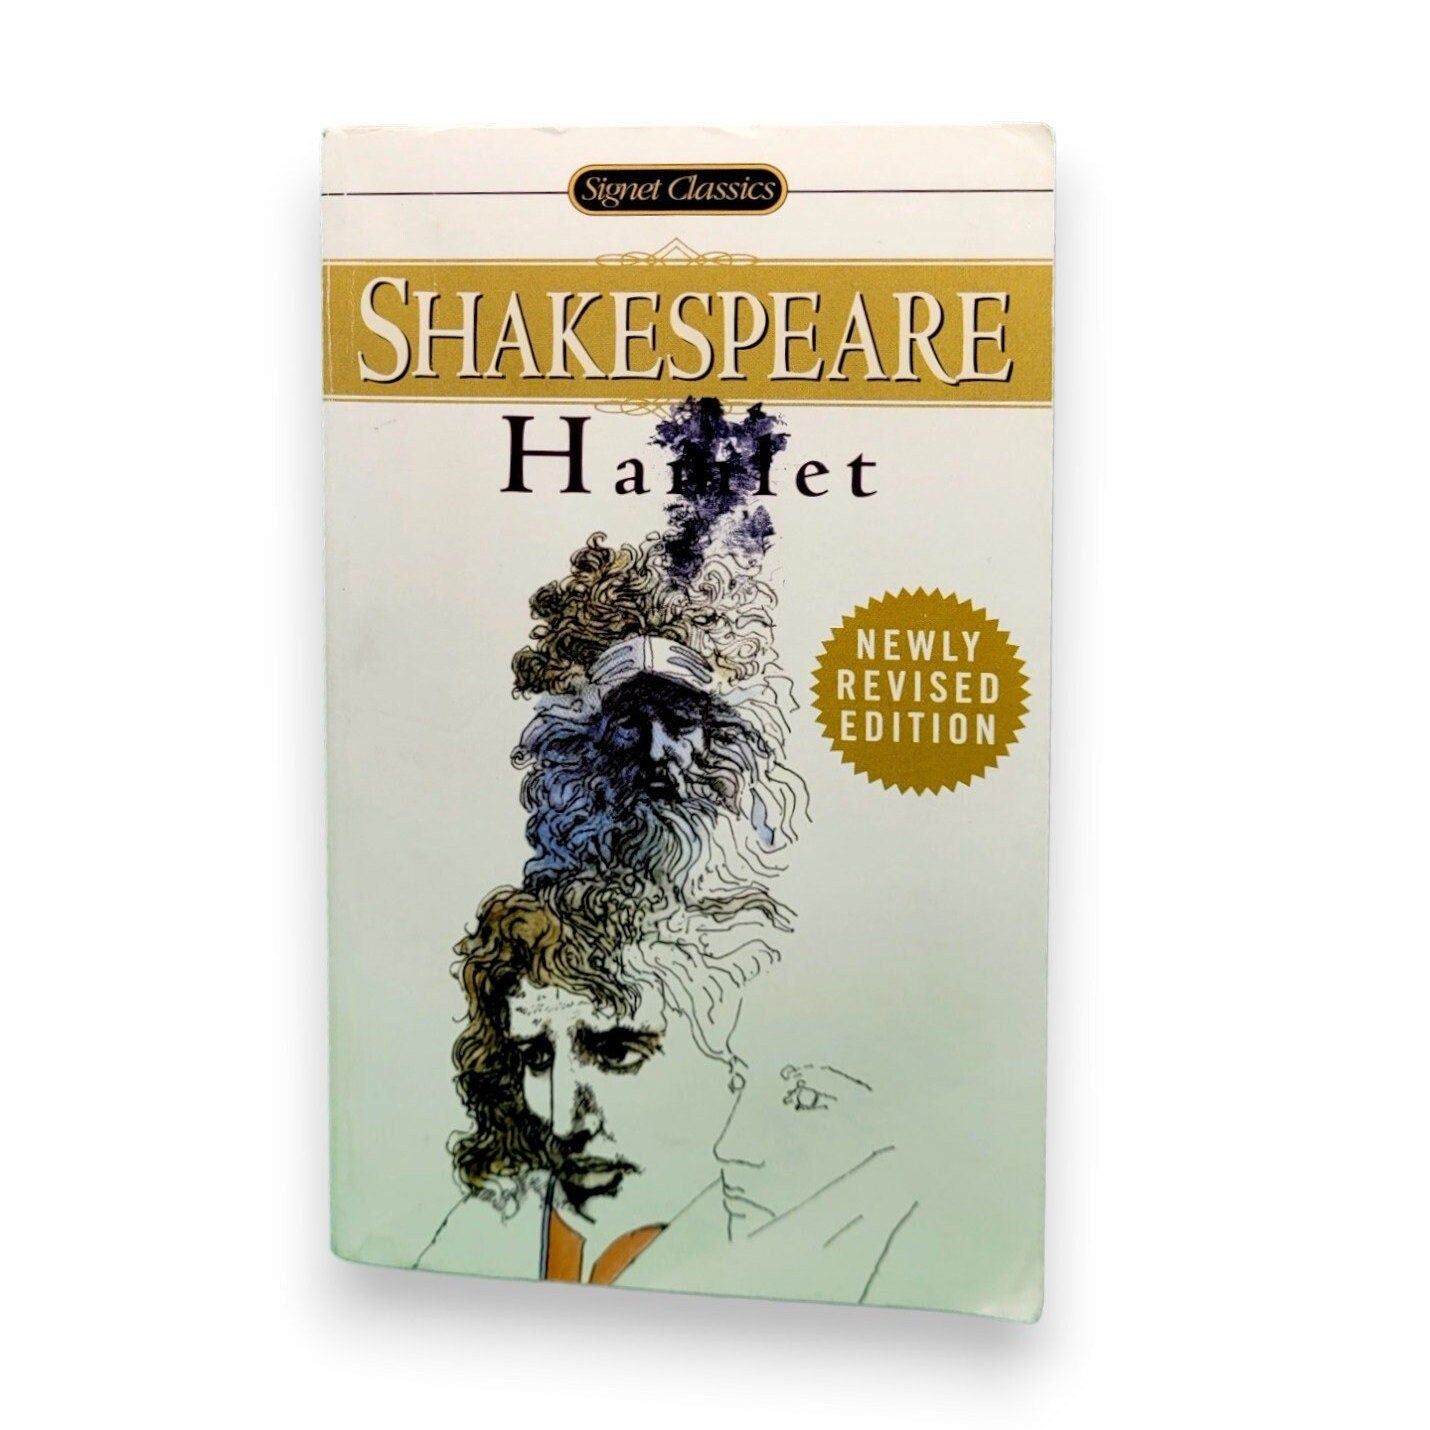 The Tragedy of Hamlet Prince of Denmark by William Shakespeare (Edited by Sylvan Barnet) 1998